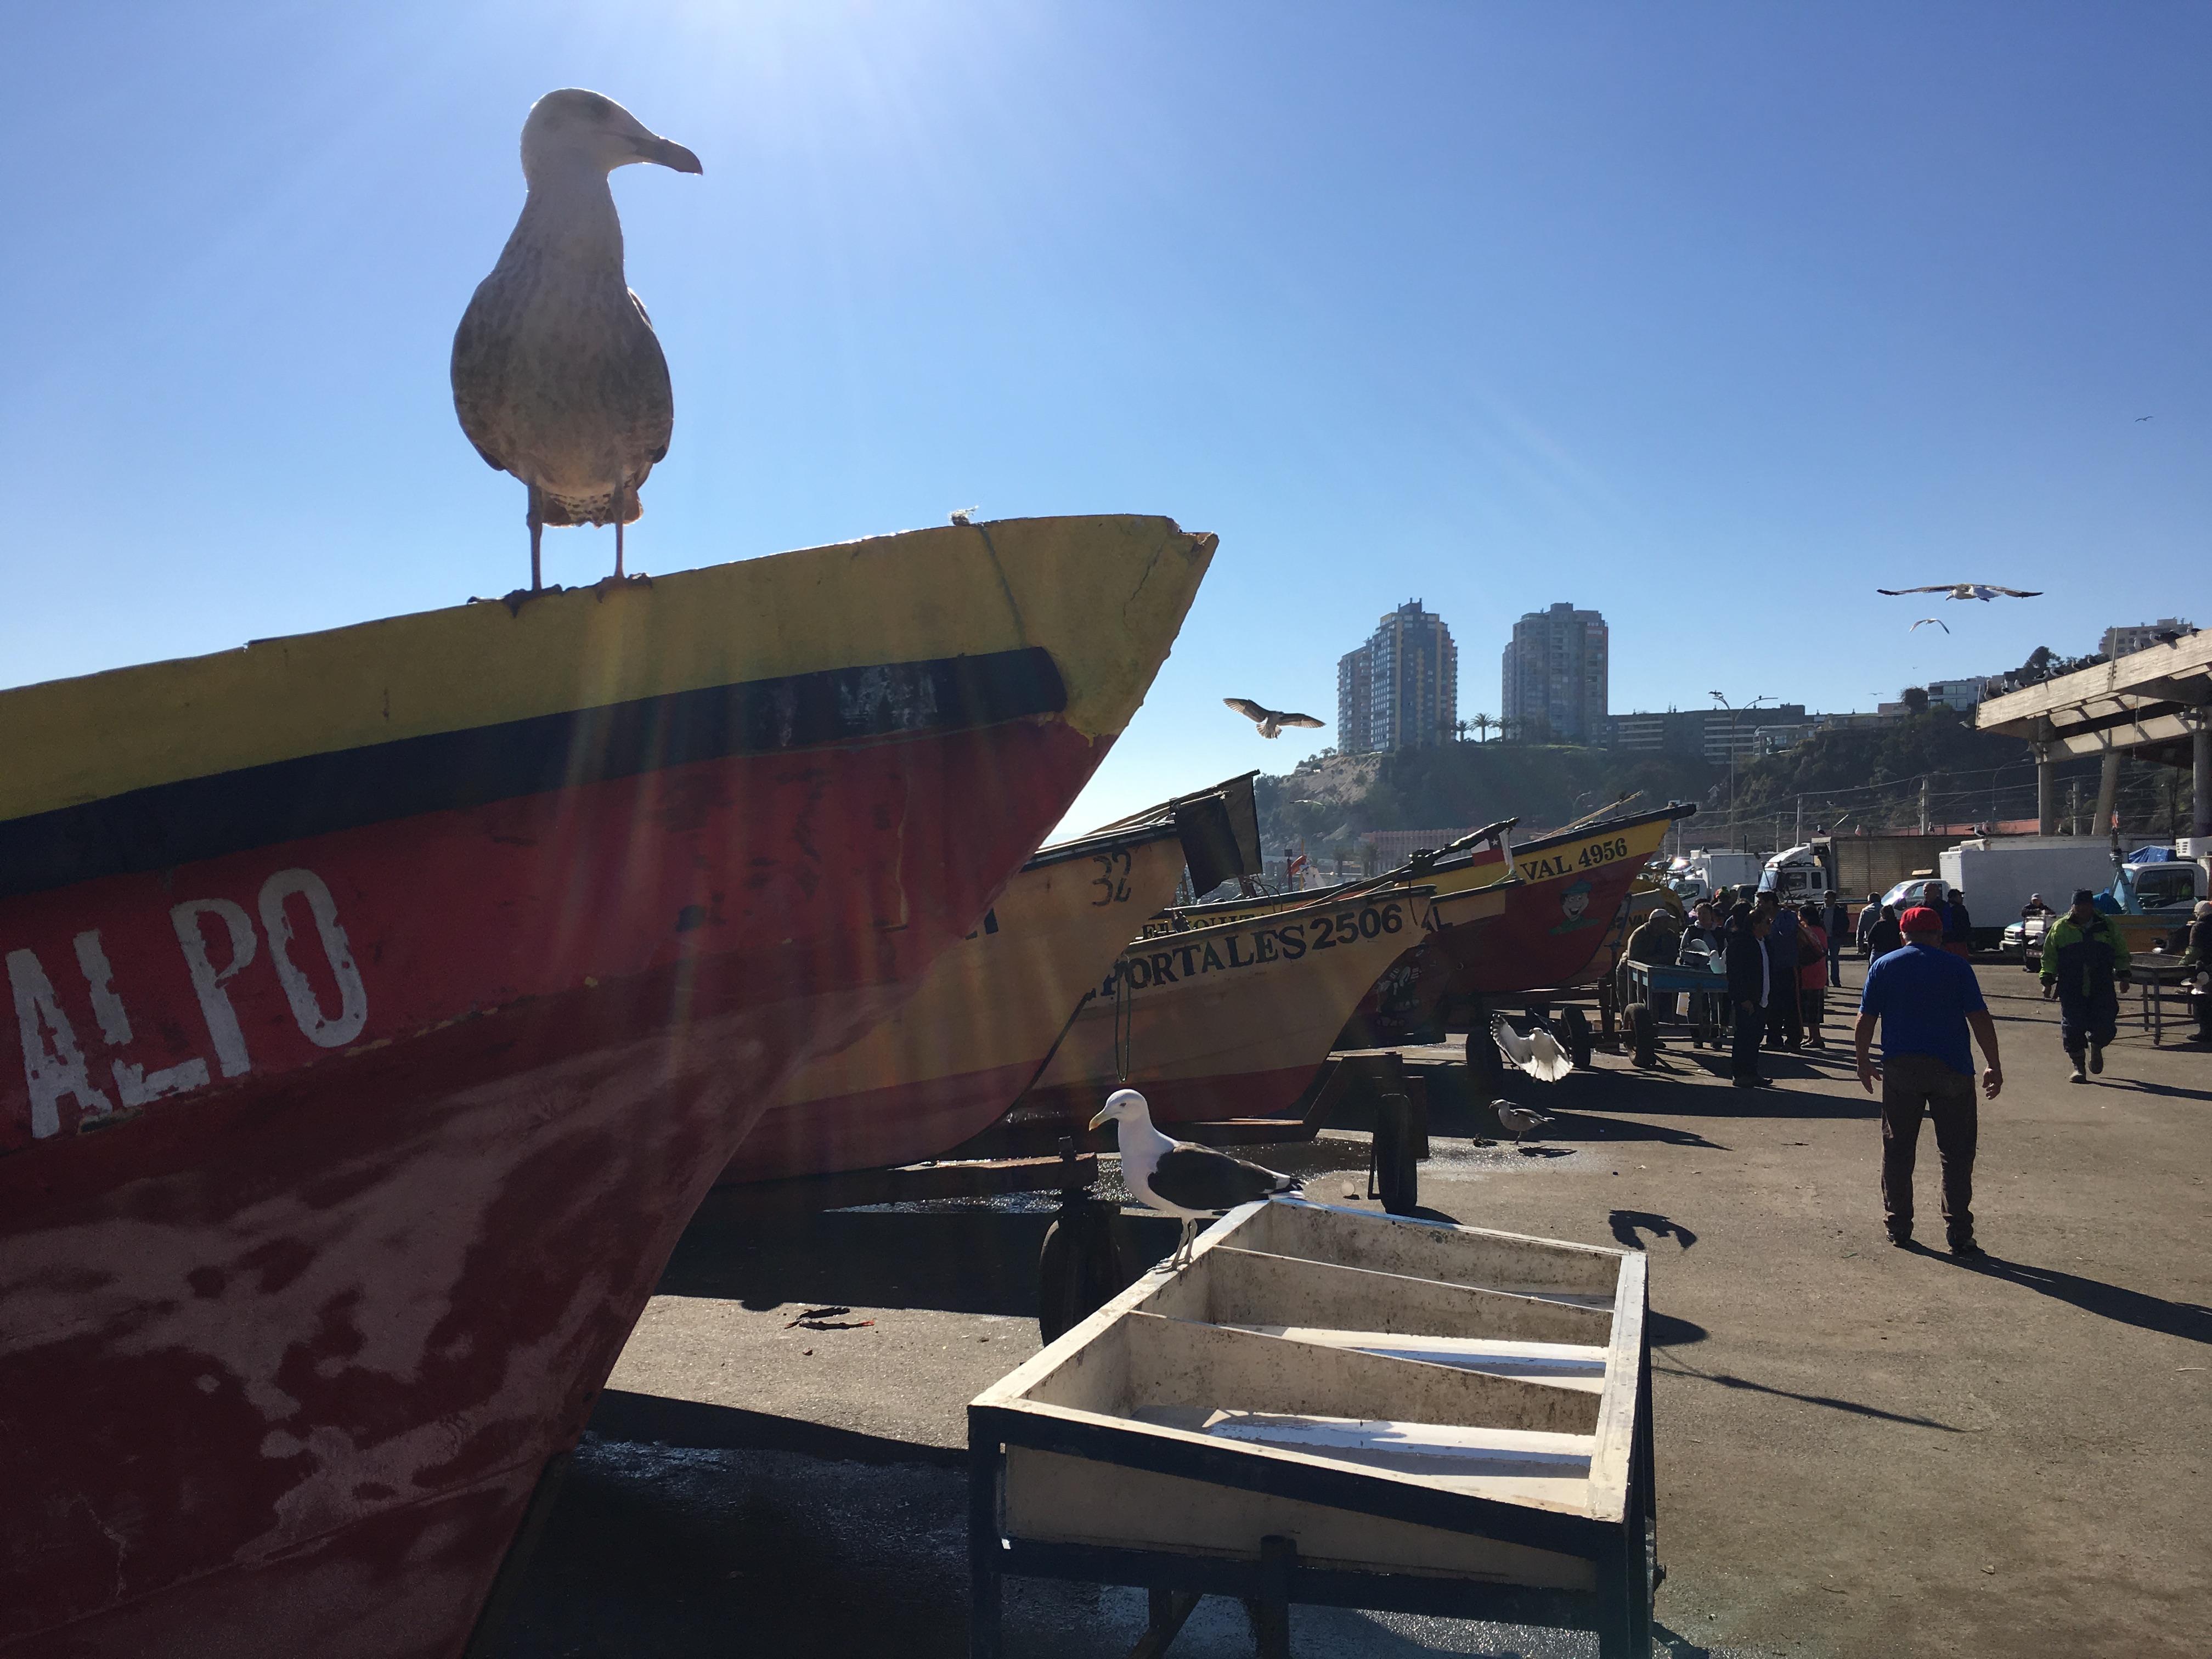 A seagull sits on a fishing boat in Chile